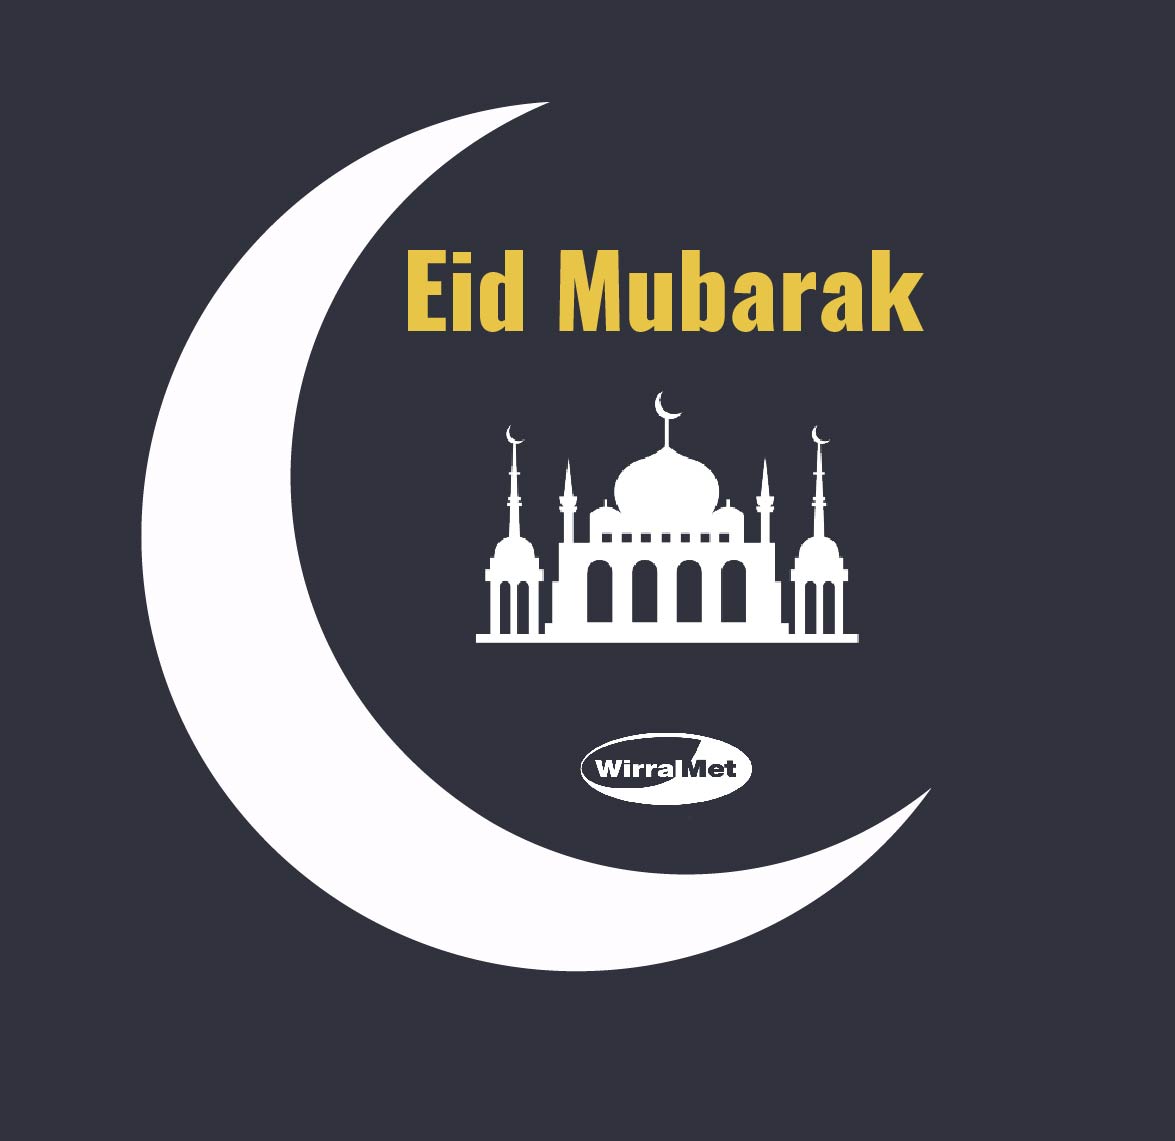 Eid Mubarak to all of our students, staff and the wider community who are celebrating 🌙